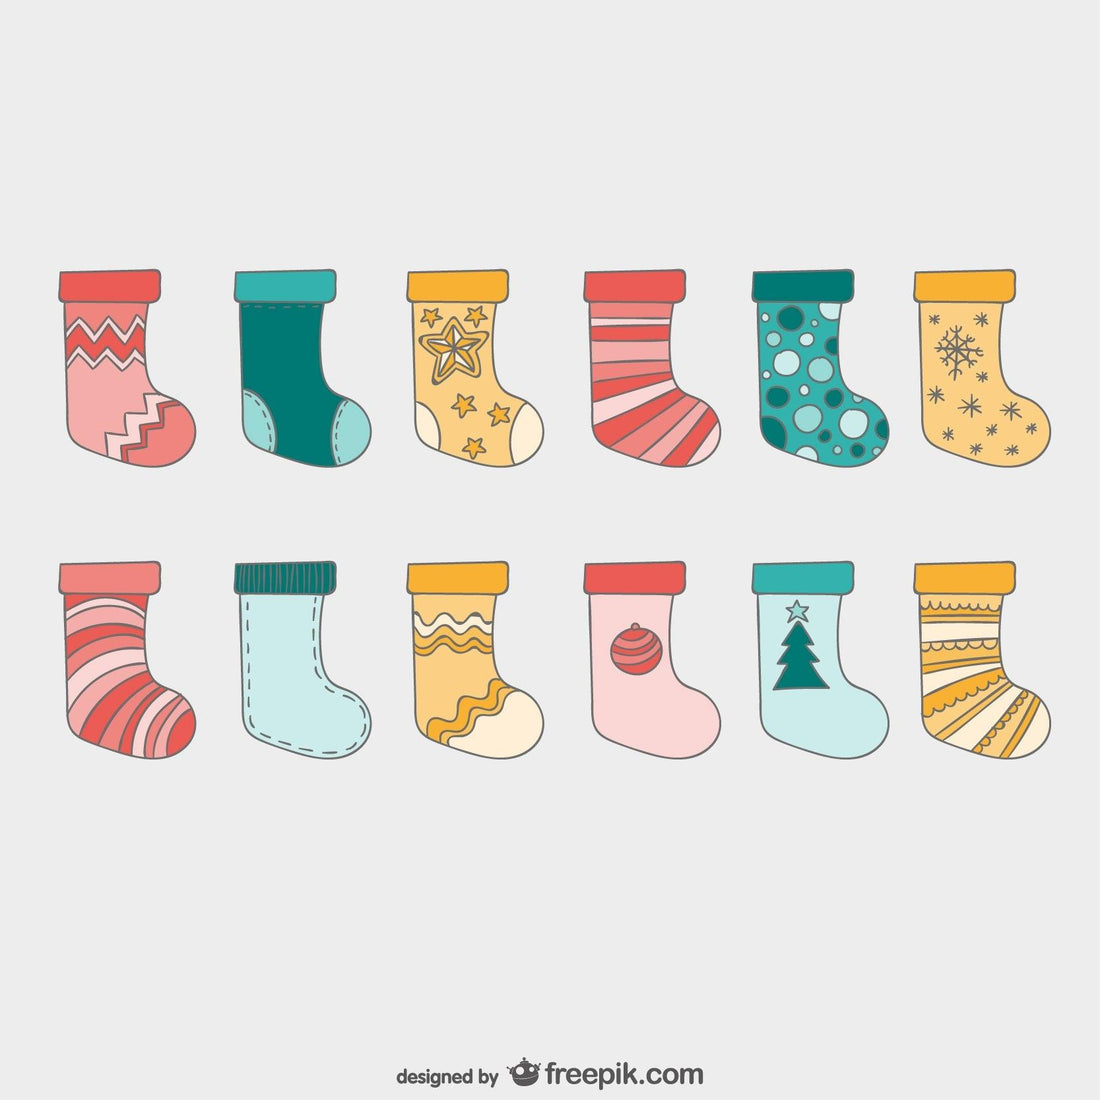 How Do You Say "Sock" in Spanish: A Guide to Spanish Vocabulary - Maves Apparel